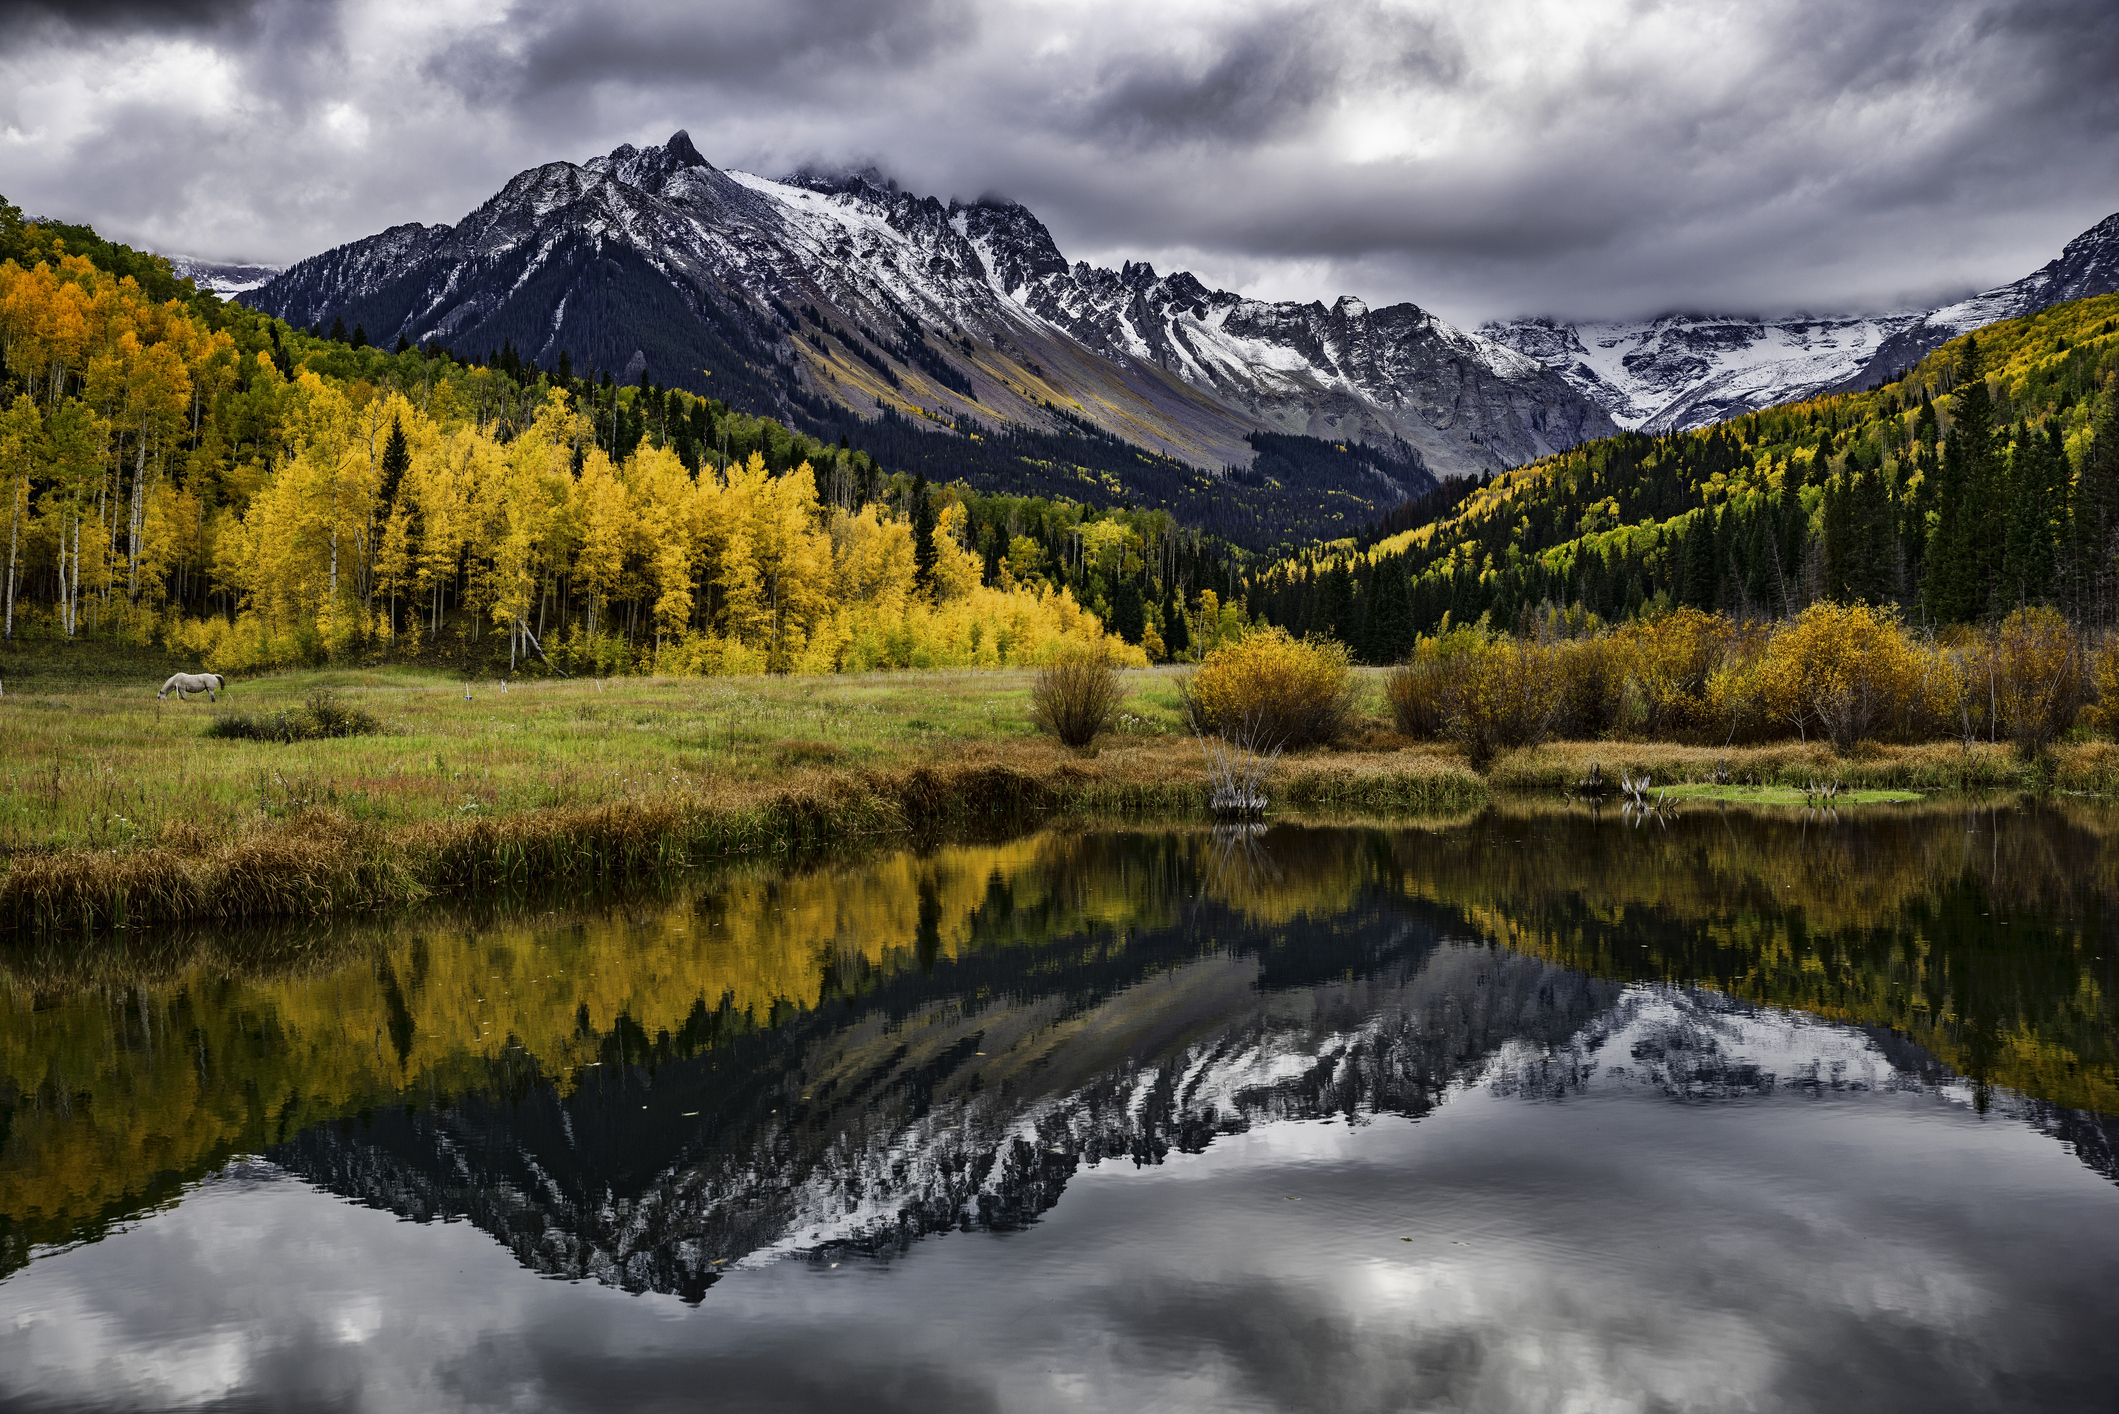 Yellow aspens in front of a snow-capped mountain.